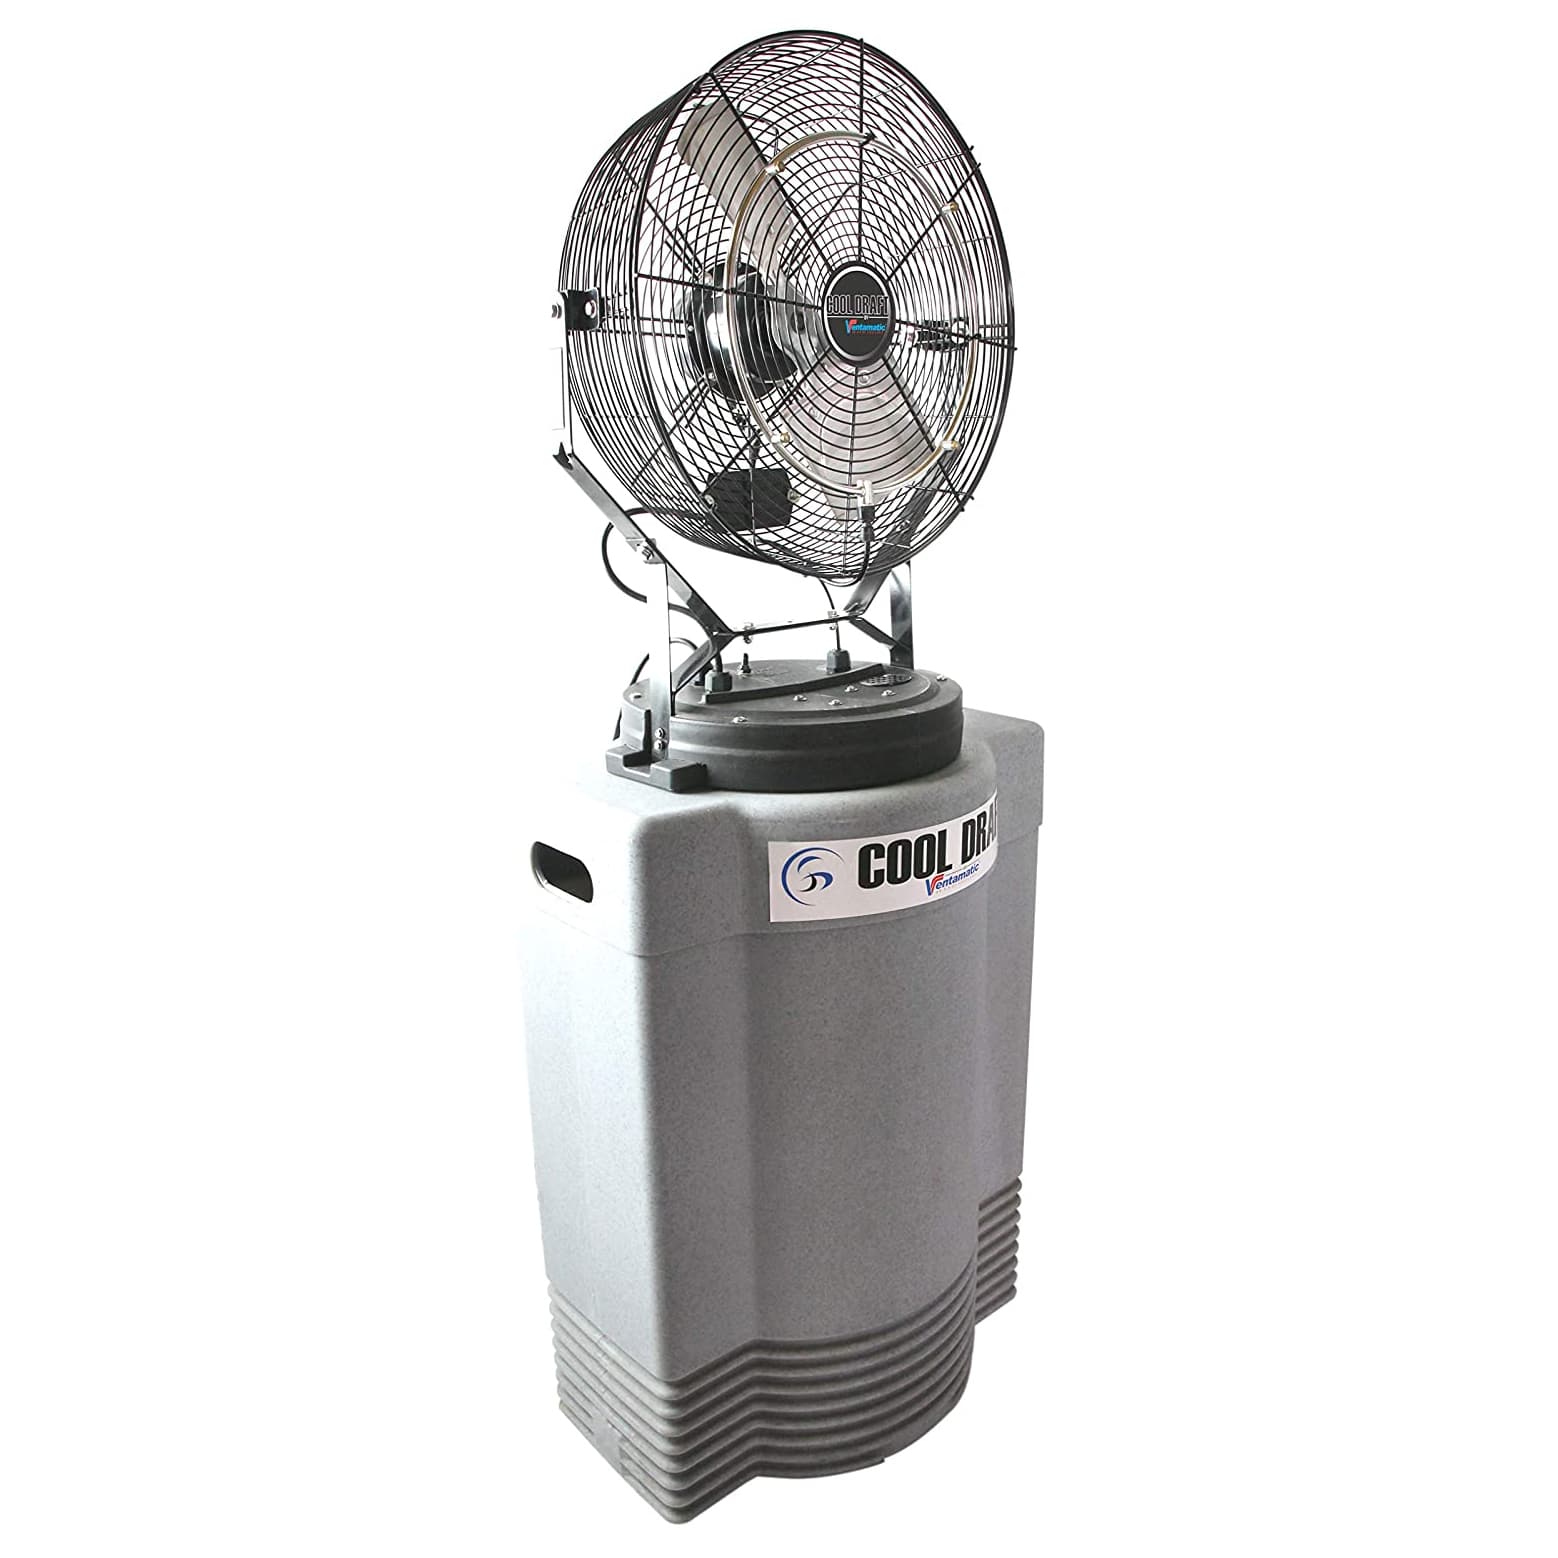 Top 10 Best Outdoor Misting Fans in 2022 Reviews | Buyer's Guide